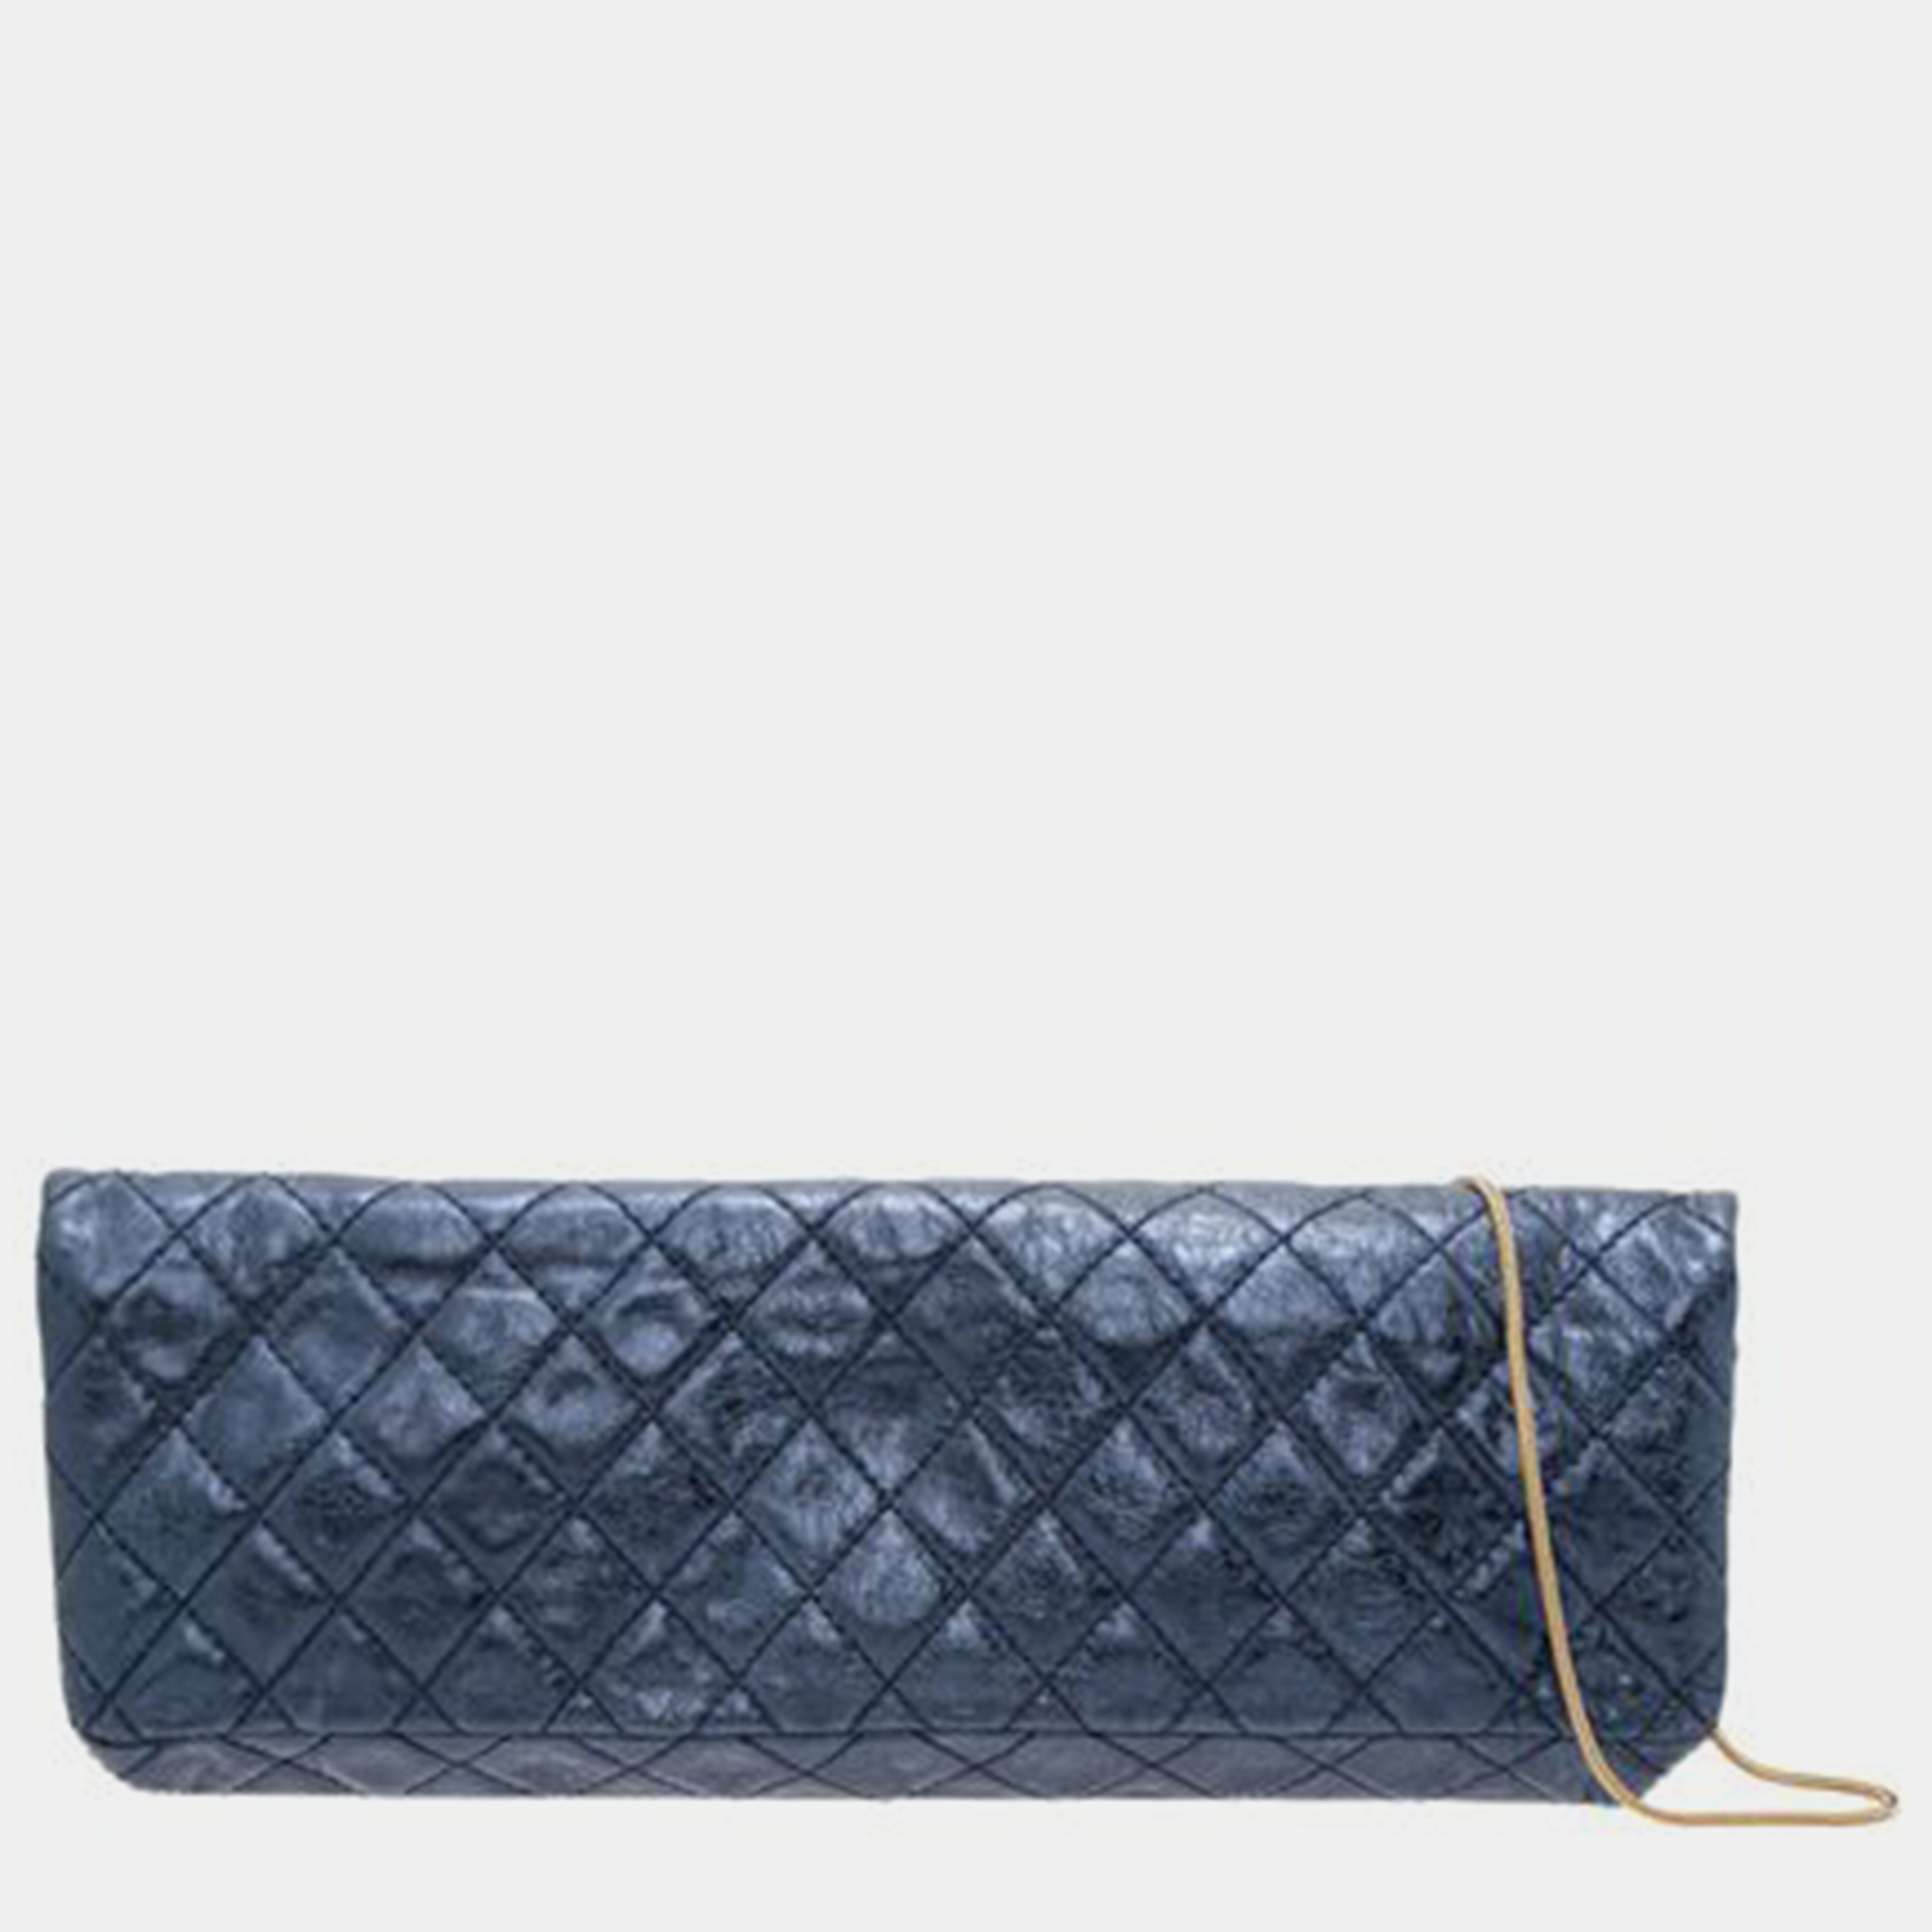 CHANEL East West Metallic Blue Quilted Leather SHOULDER BAGS